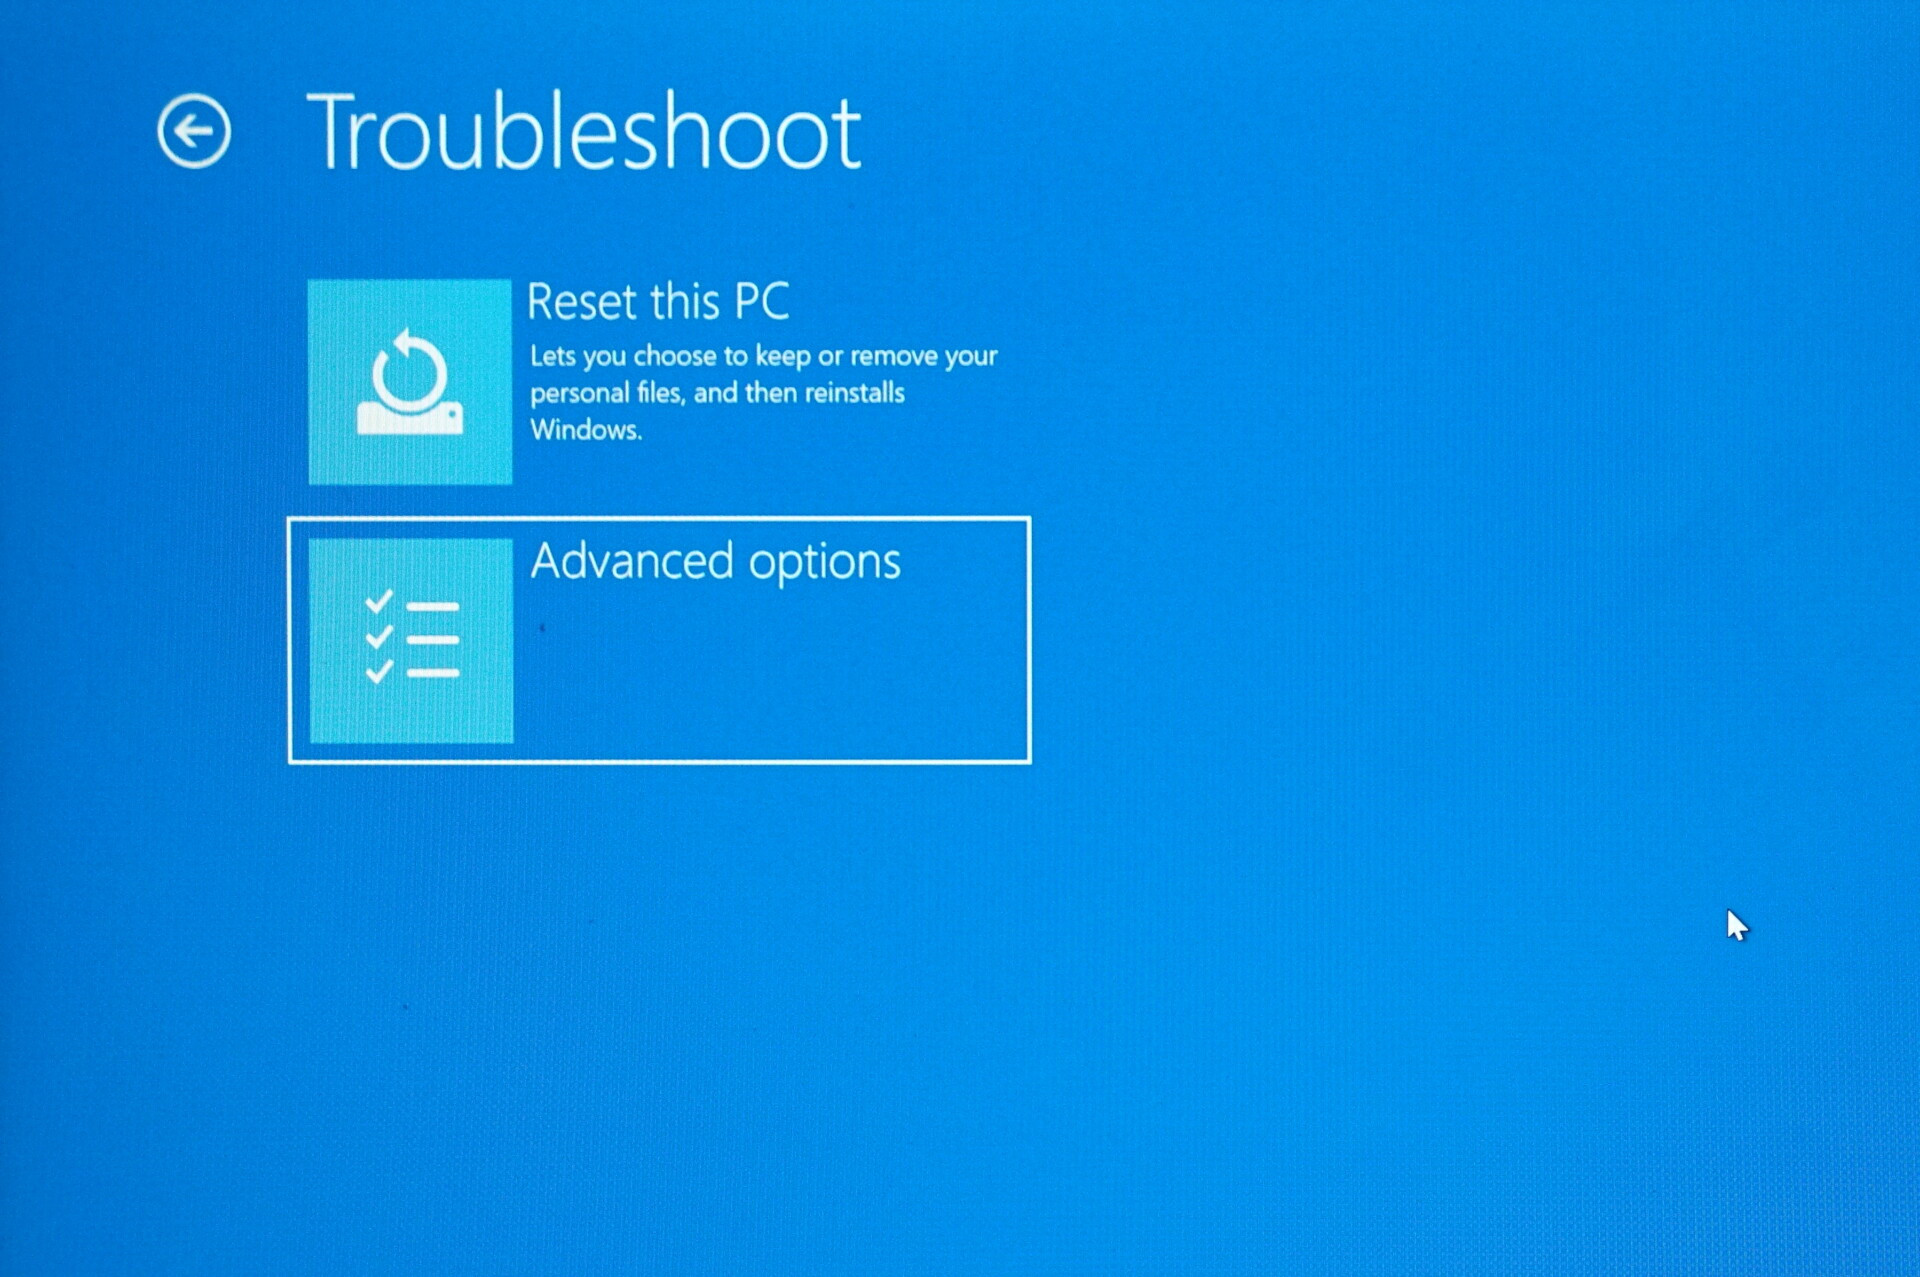 Windows 10 troubleshoot reset and advanced options - how to do a System Restore on Windows 10